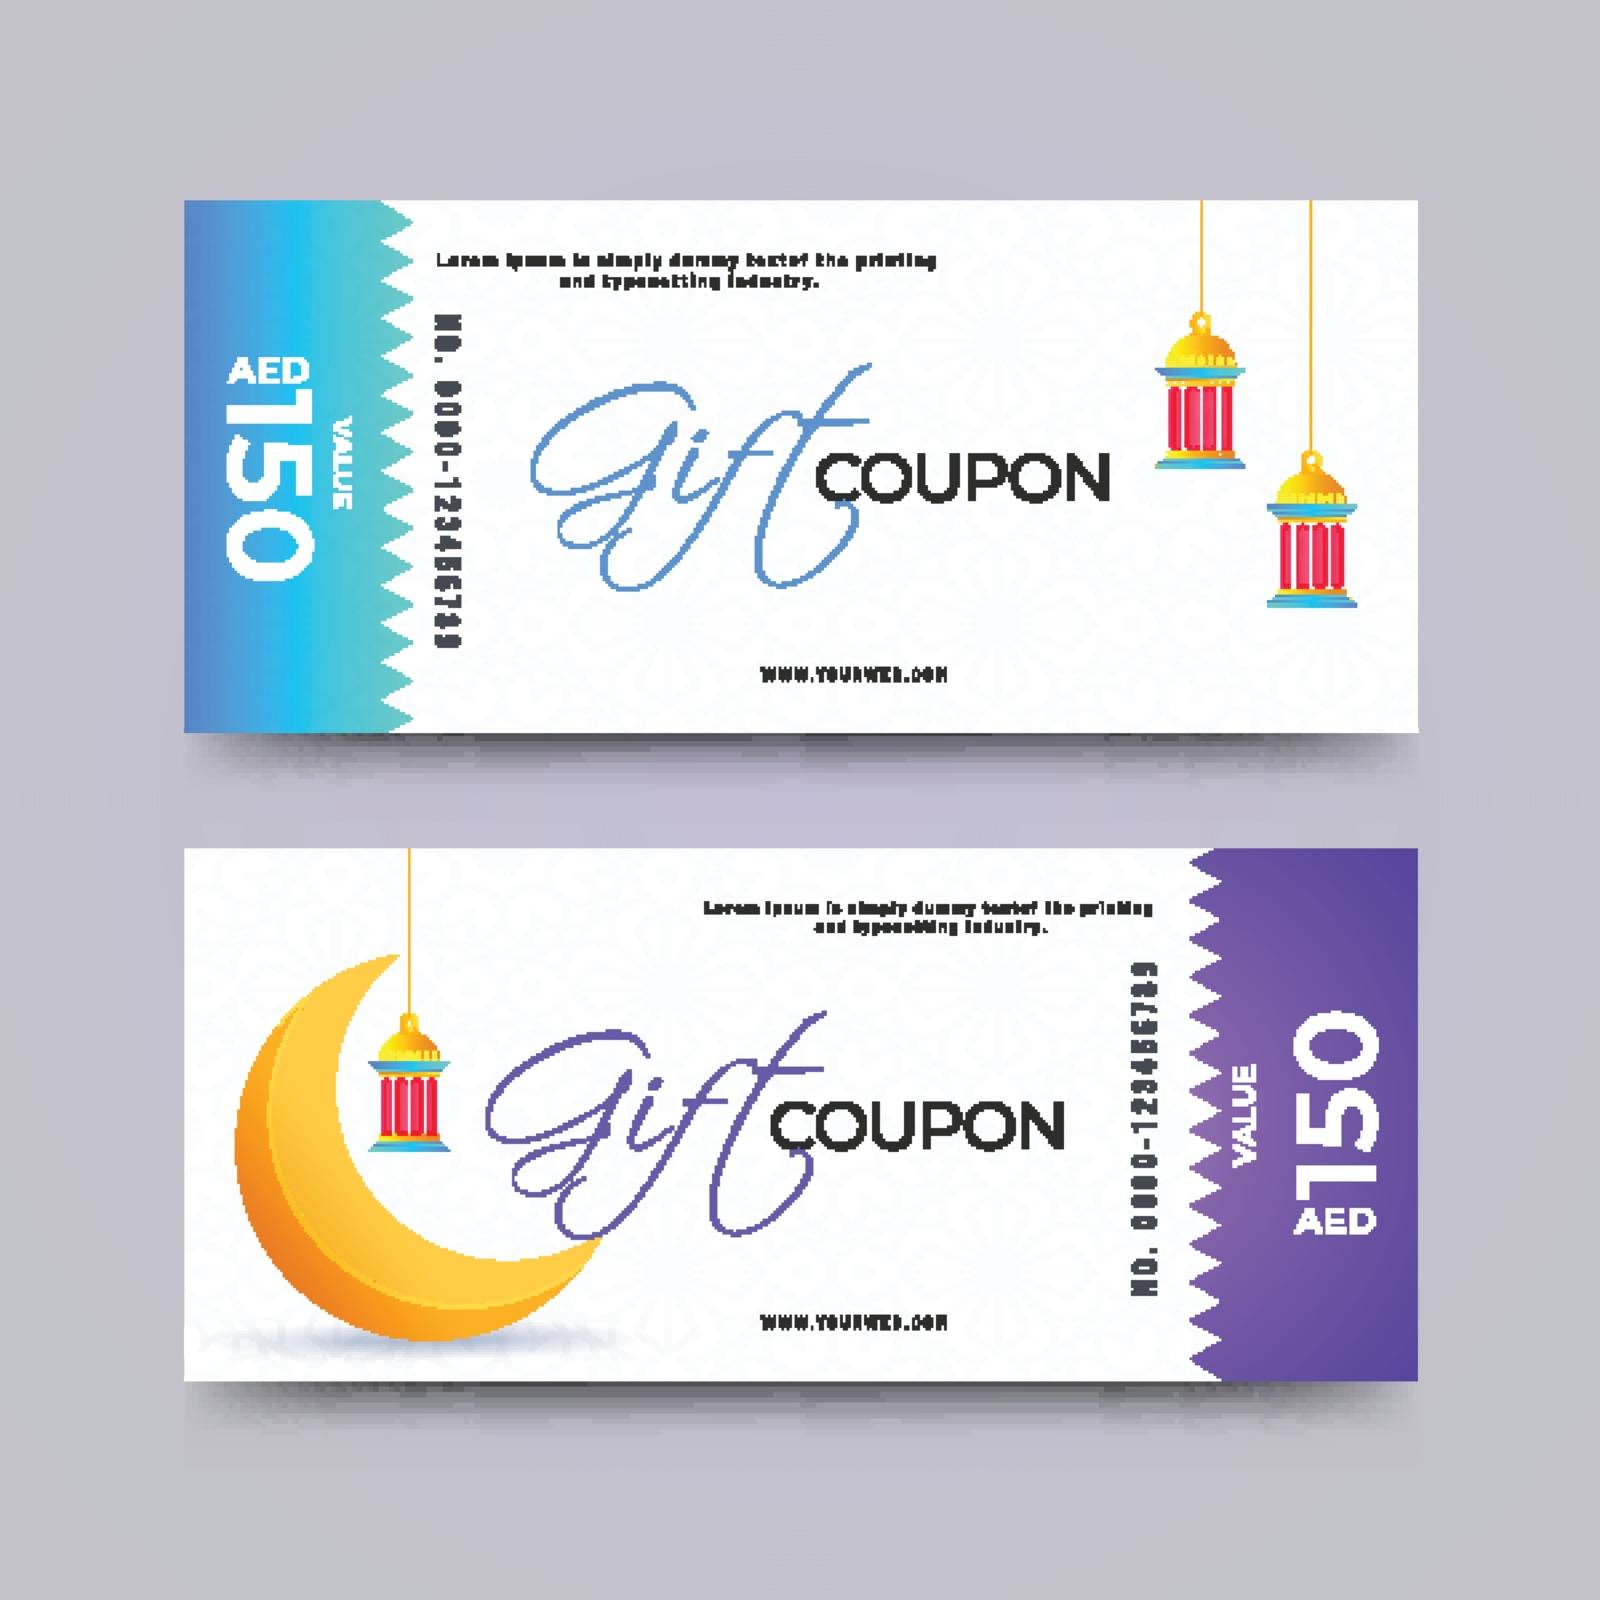 Horizontal gift coupon or voucher layout with best discount offer and hanging lantern decoration on white background.